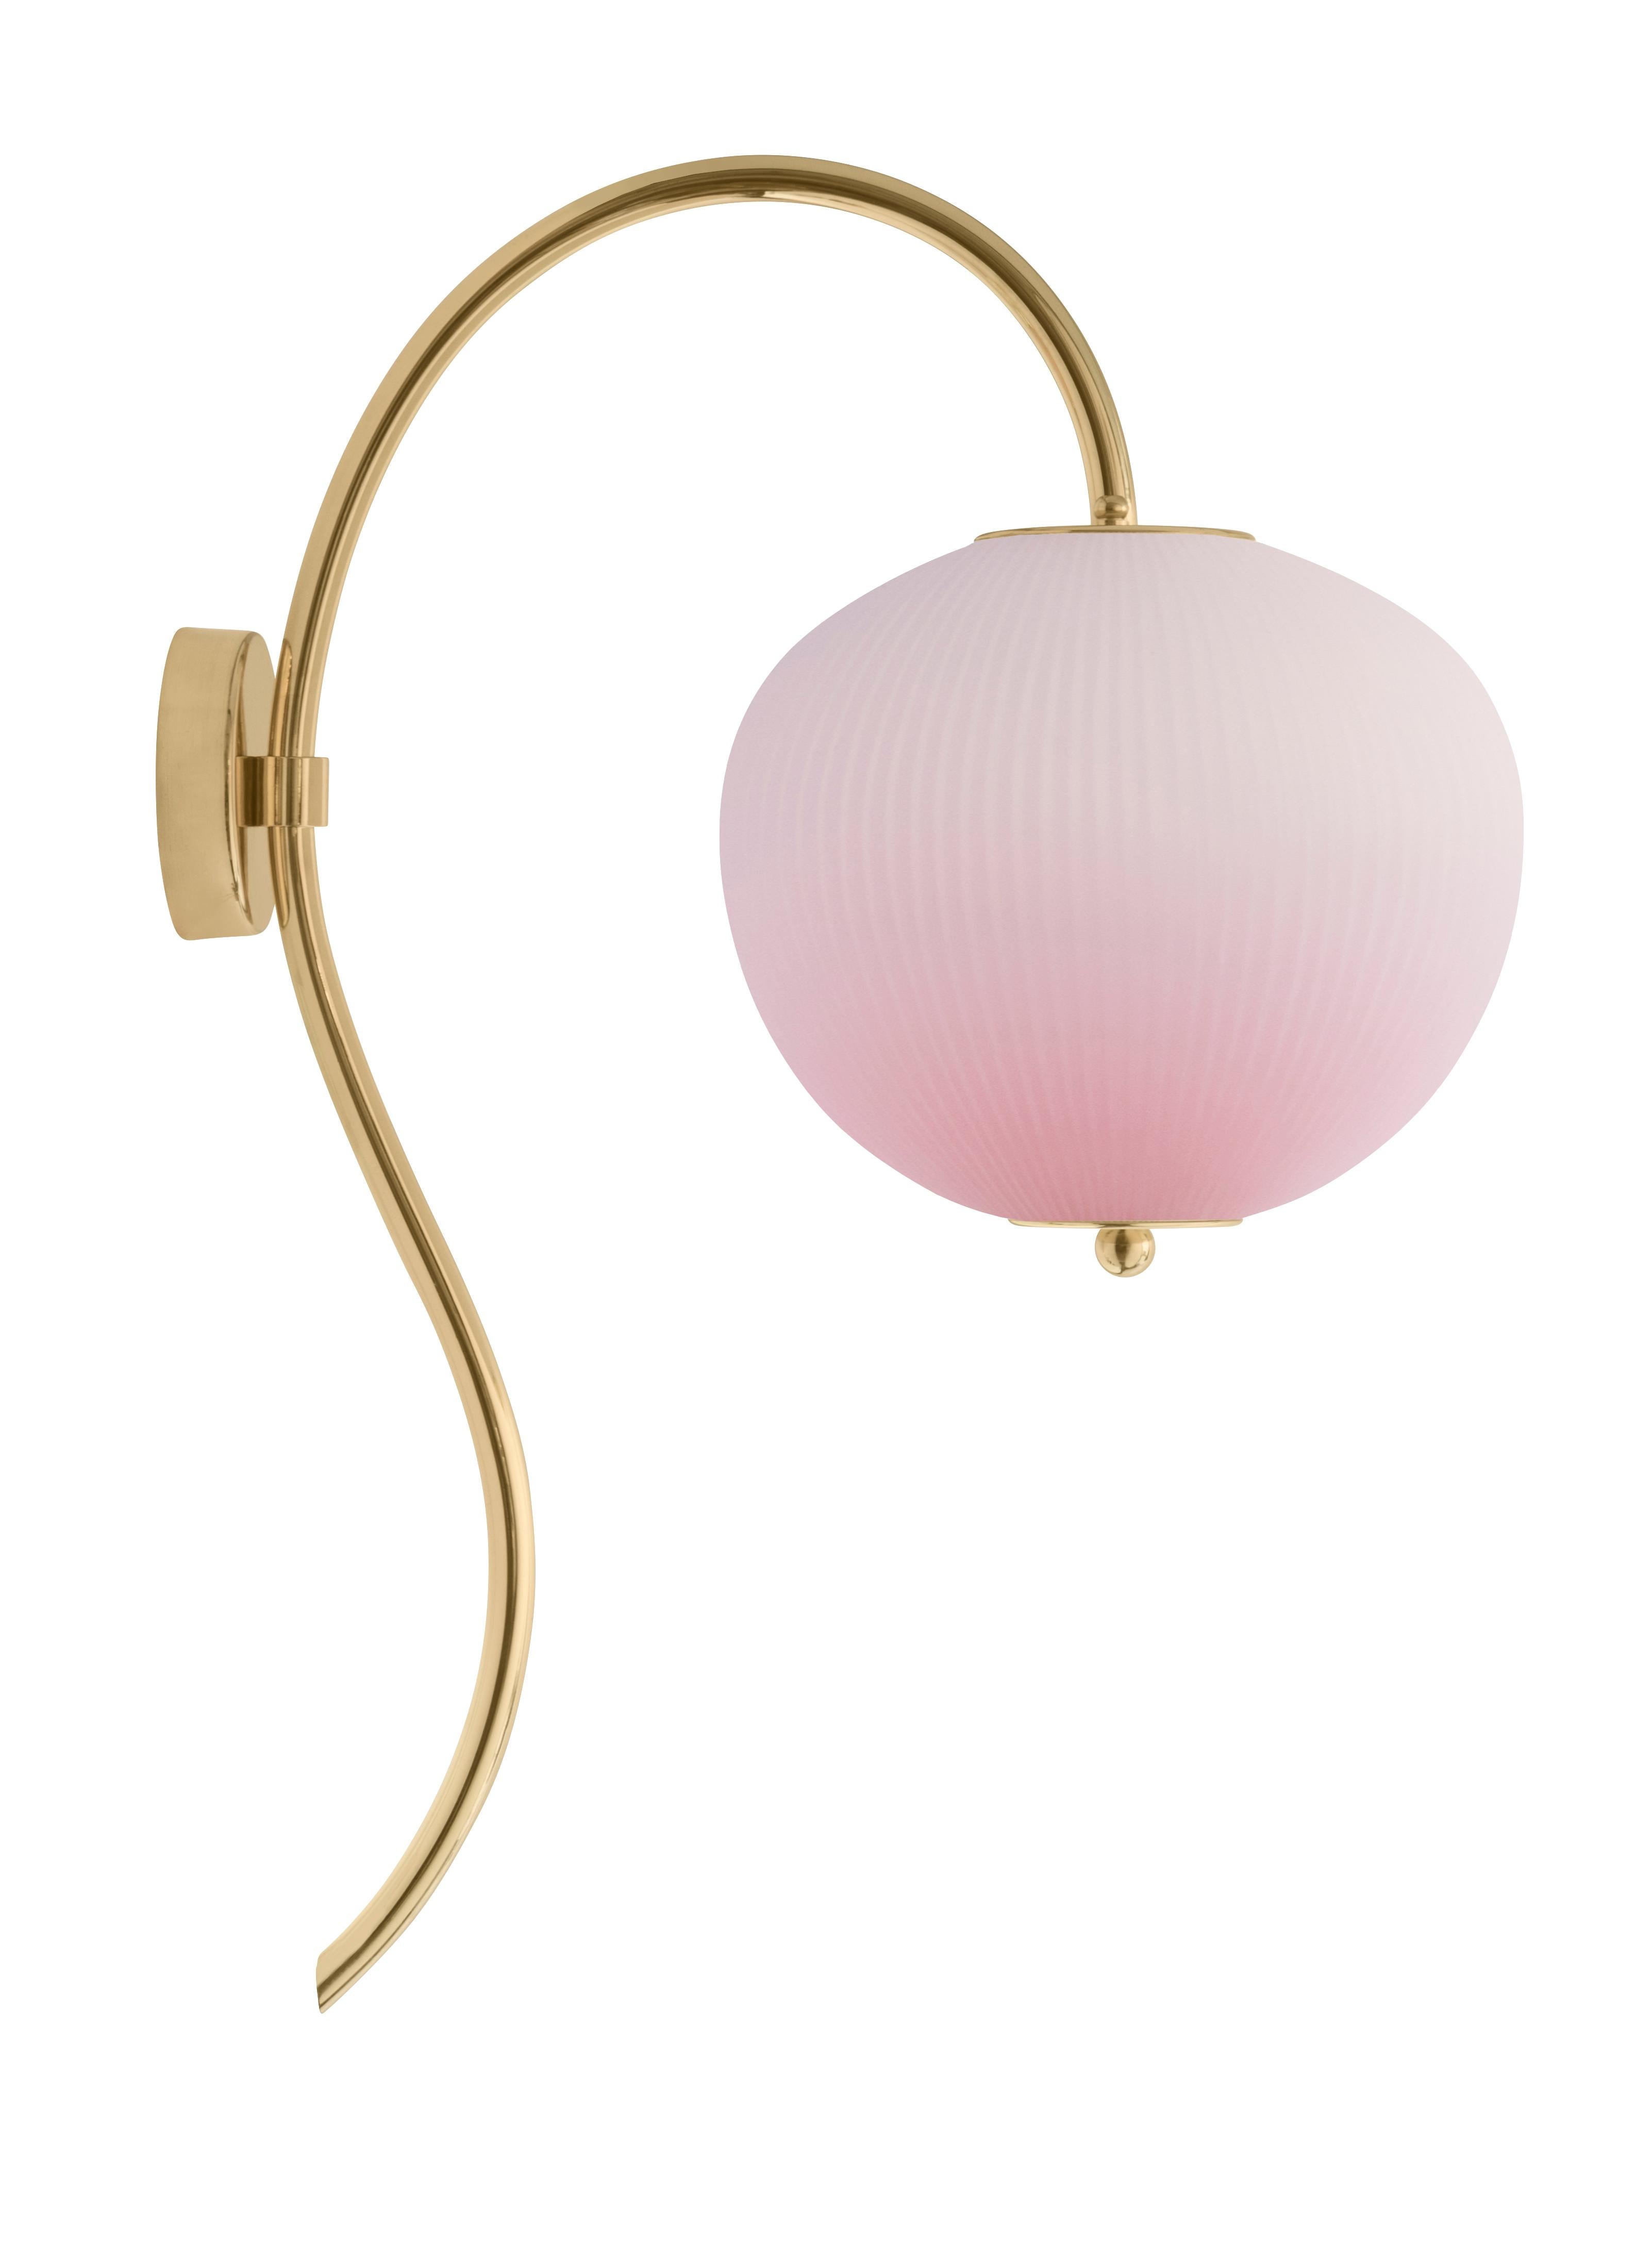 Wall lamp China 03 by Magic Circus Editions
Dimensions: H 62 x W 26.2 x D 41.5 cm
Materials: Brass, mouth blown glass sculpted with a diamond saw
Colour: soft rose

Available finishes: Brass, nickel
Available colours: enamel soft white, soft